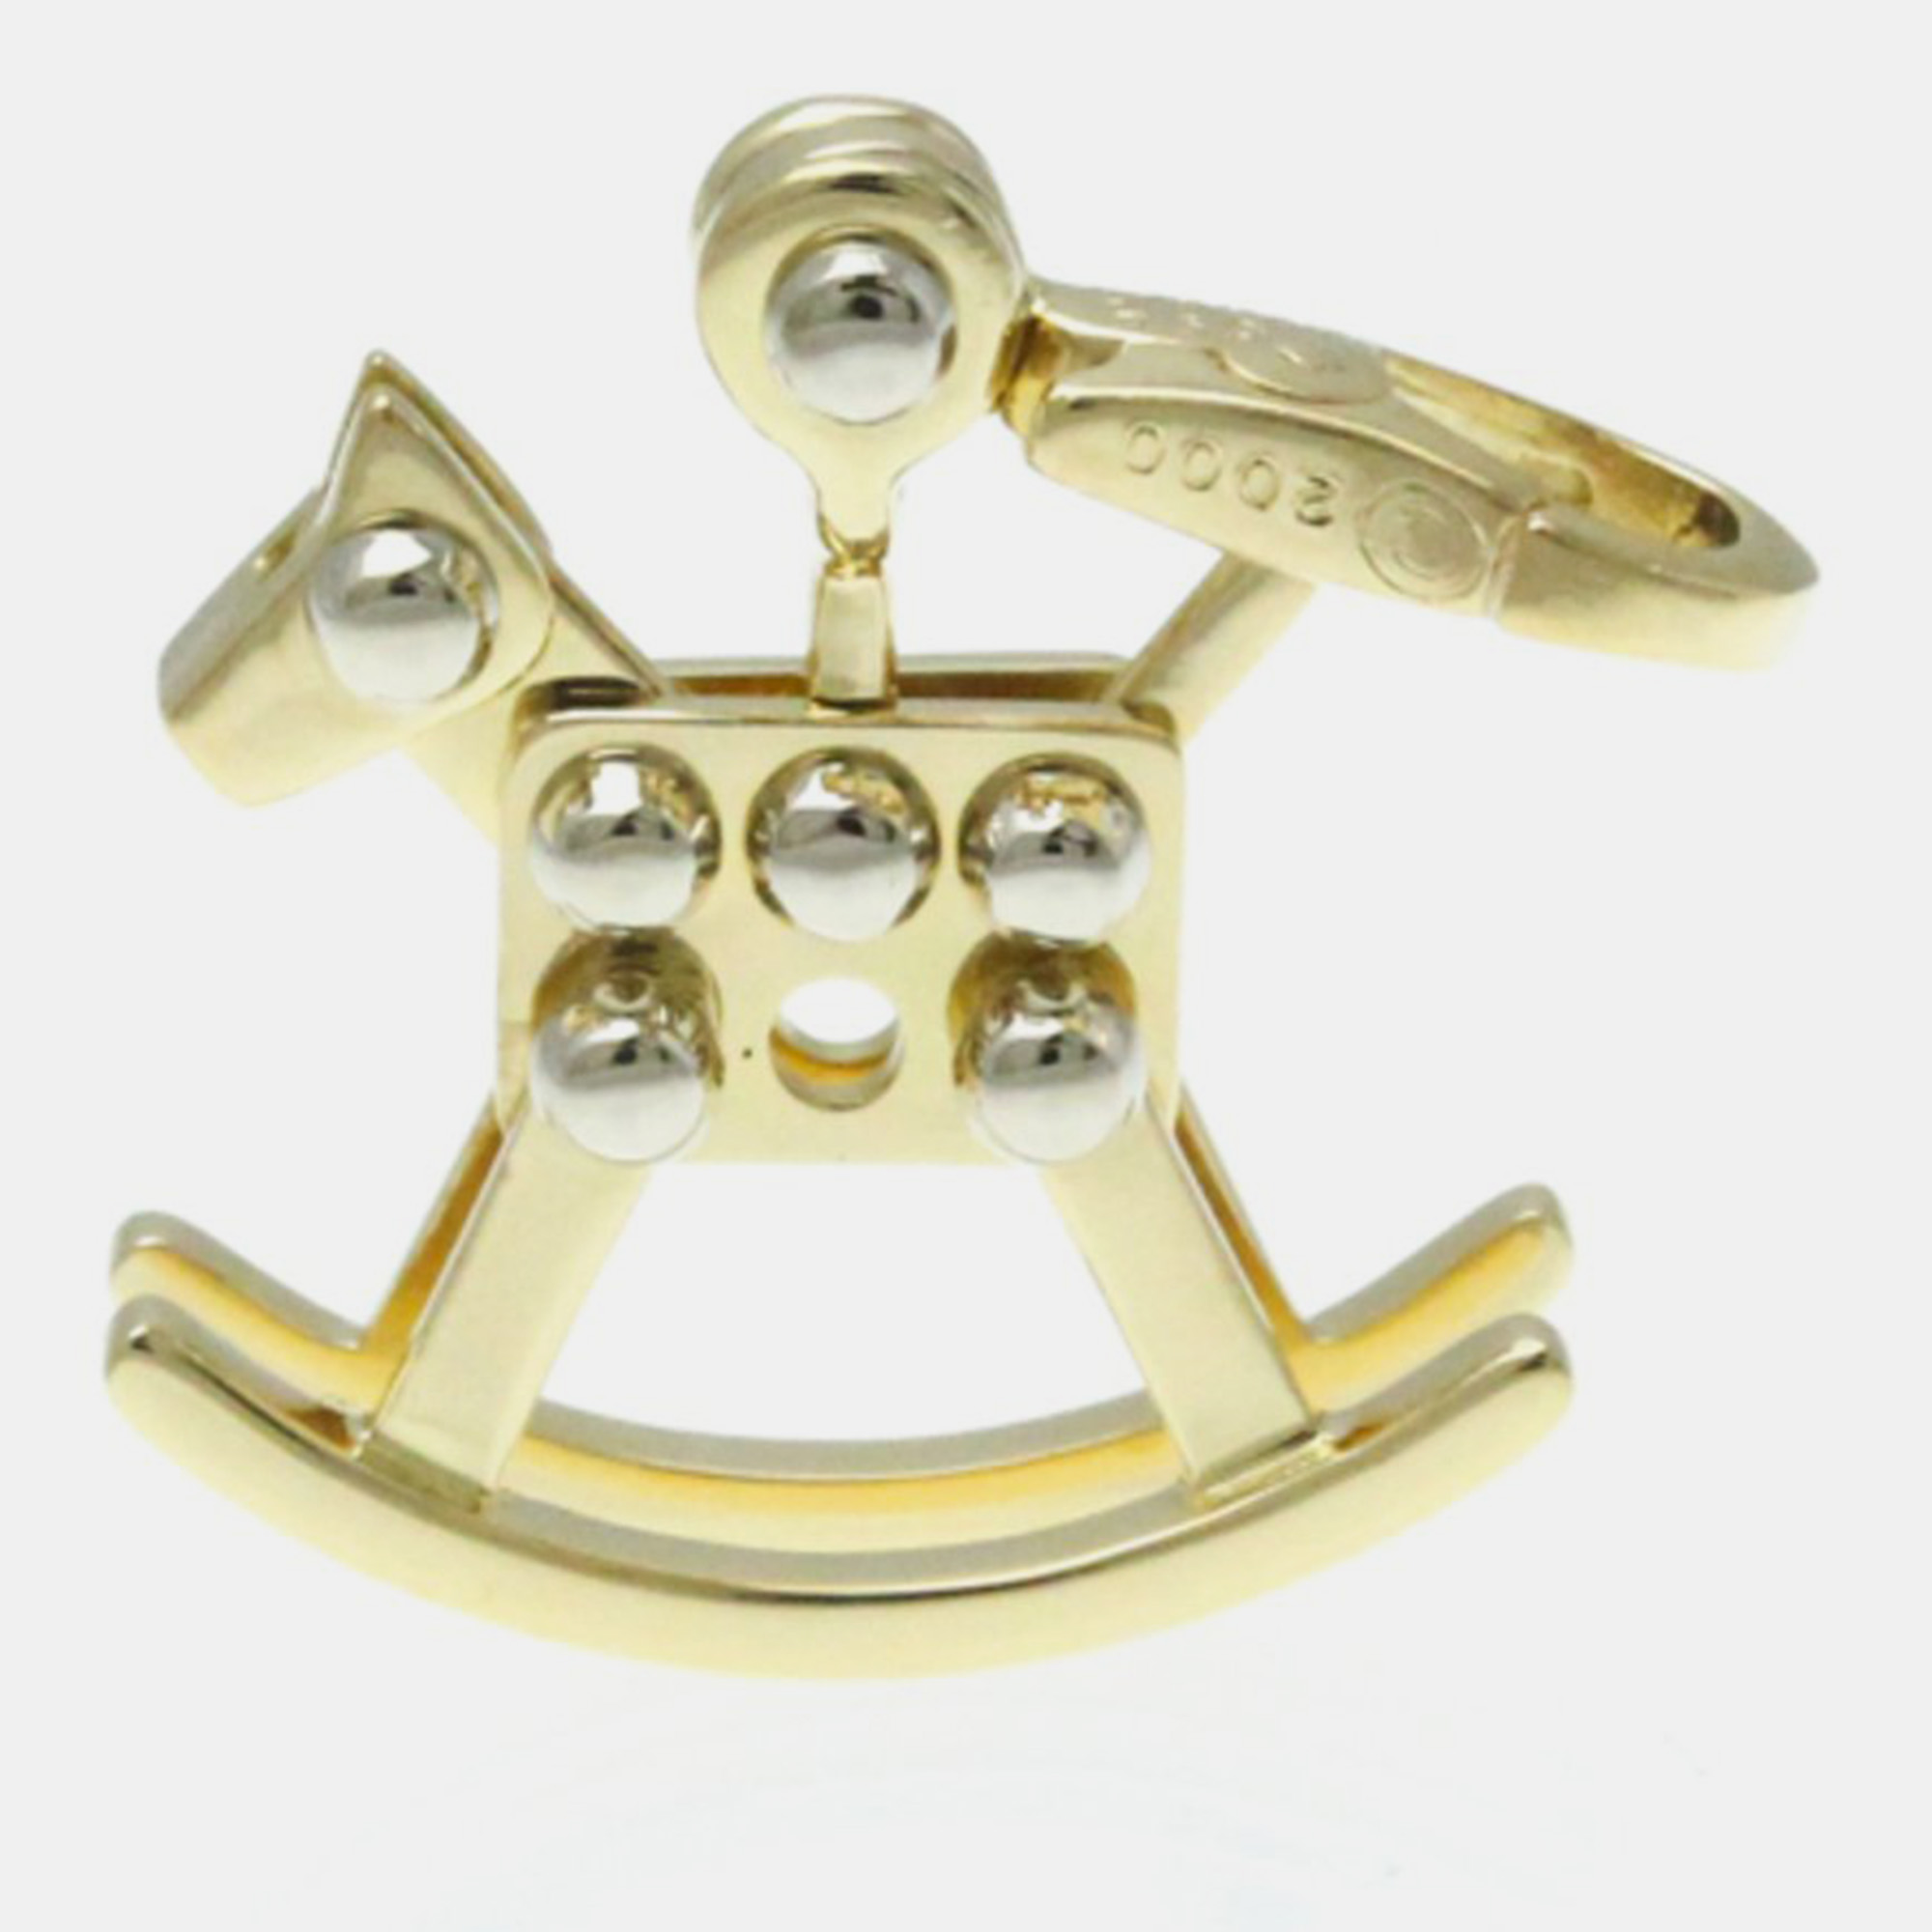 Cartier 18k white gold and 18k yellow gold rocking horse charm